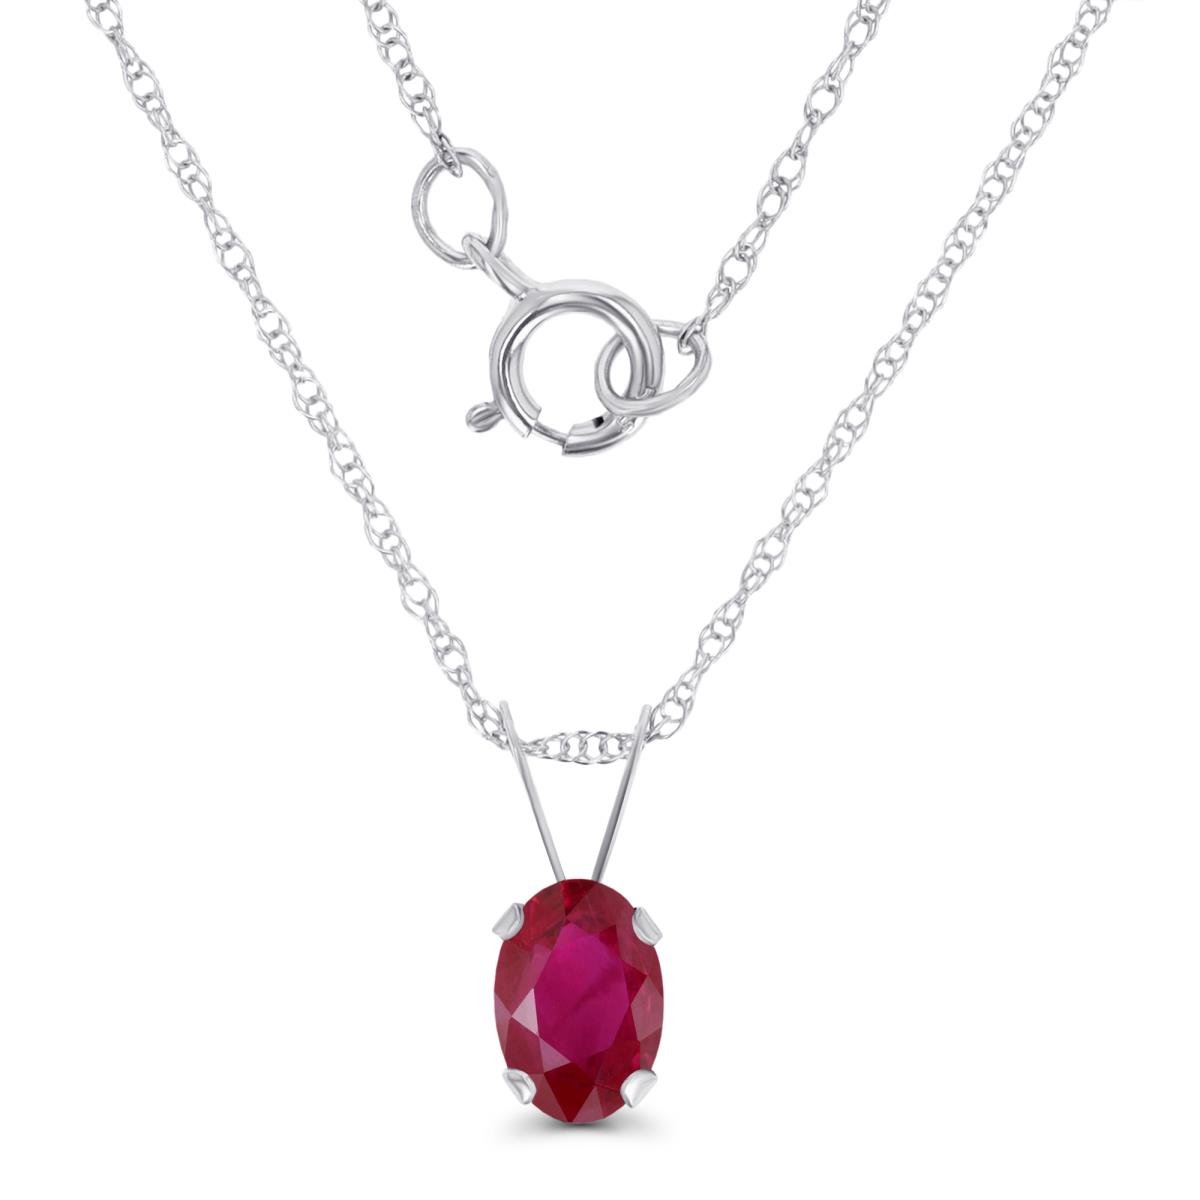 10K White Gold 6x4mm Oval Glass Filled Ruby 18" Rope Chain Necklace